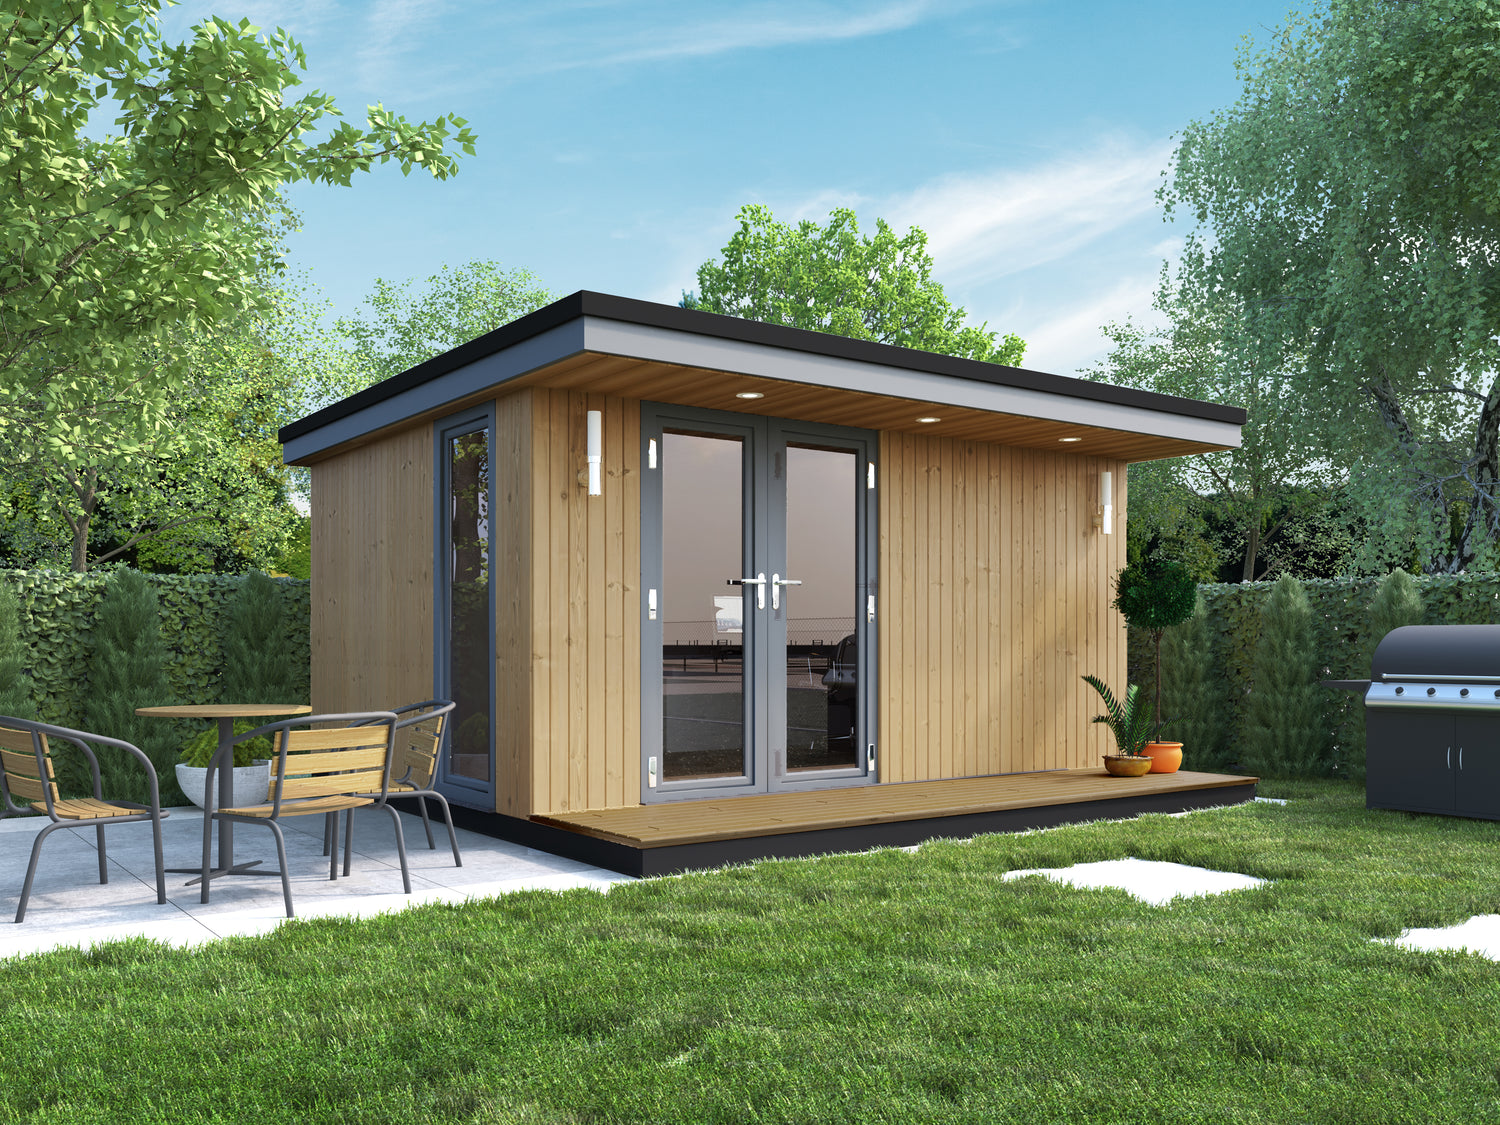 A contemporary garden room office with a front canopy and table and chairs.